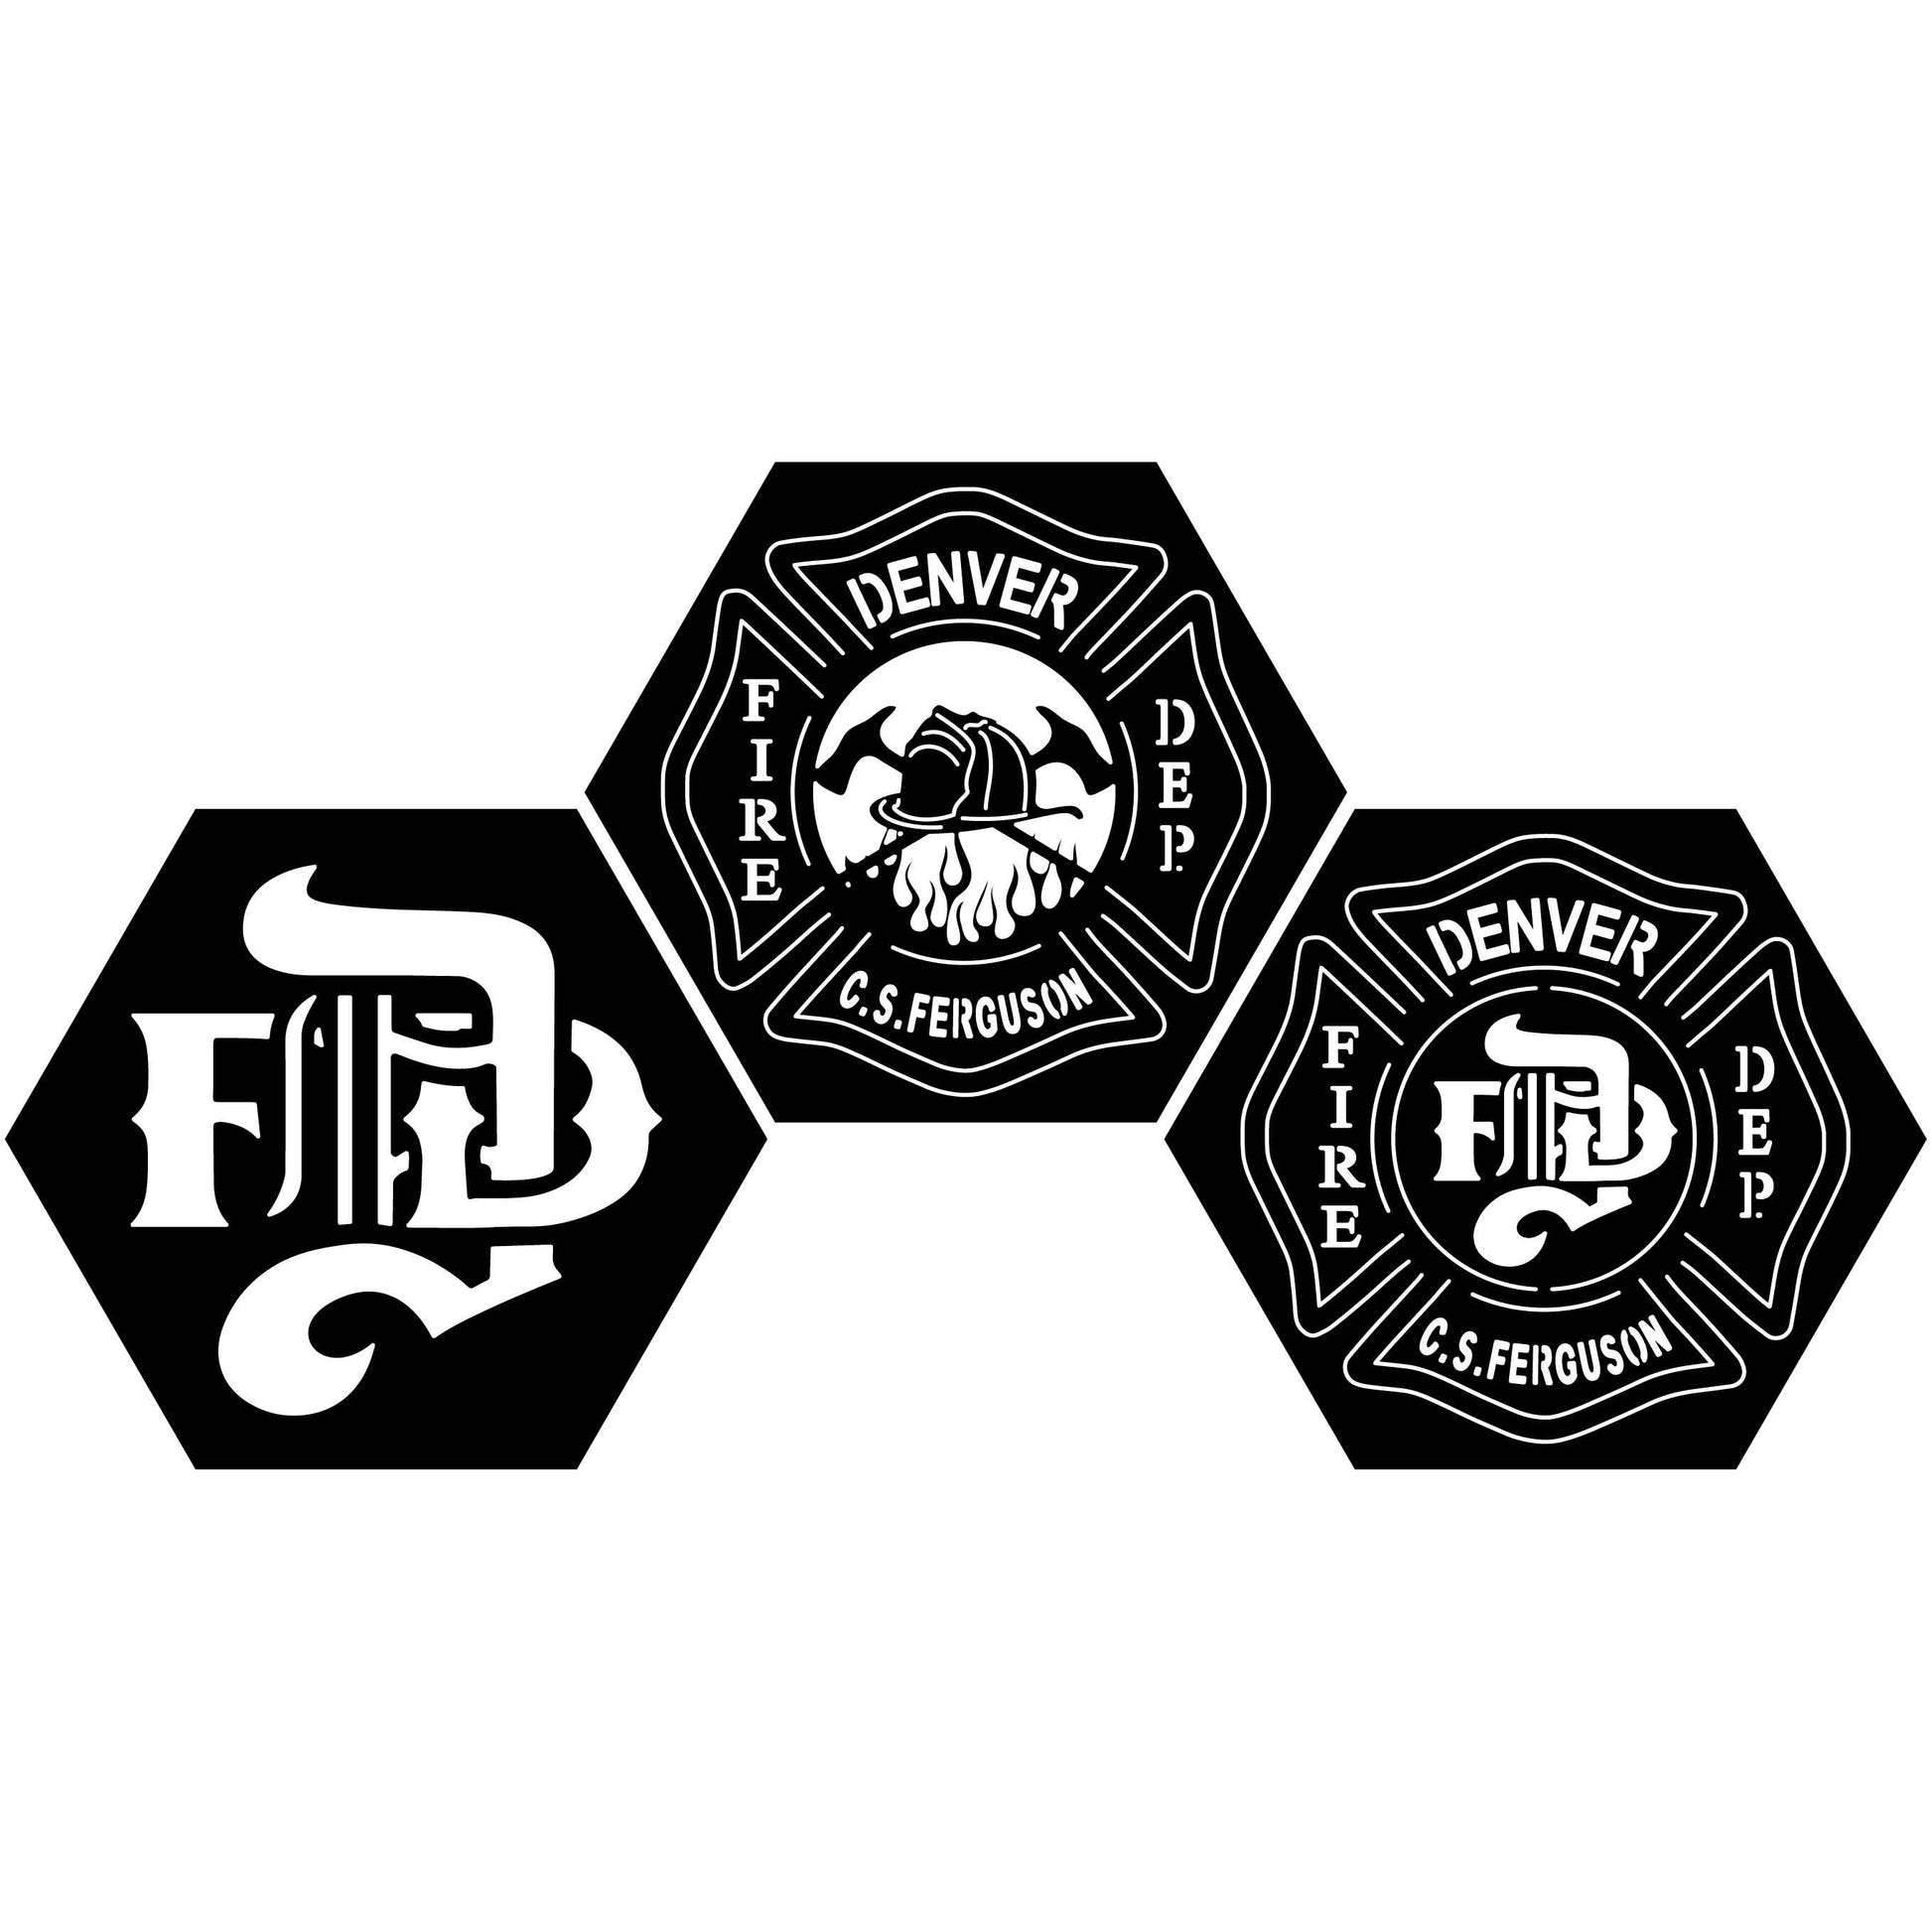 Fire Pit Ball Denver Firefighter Logo-dxf files cut ready for cnc machines